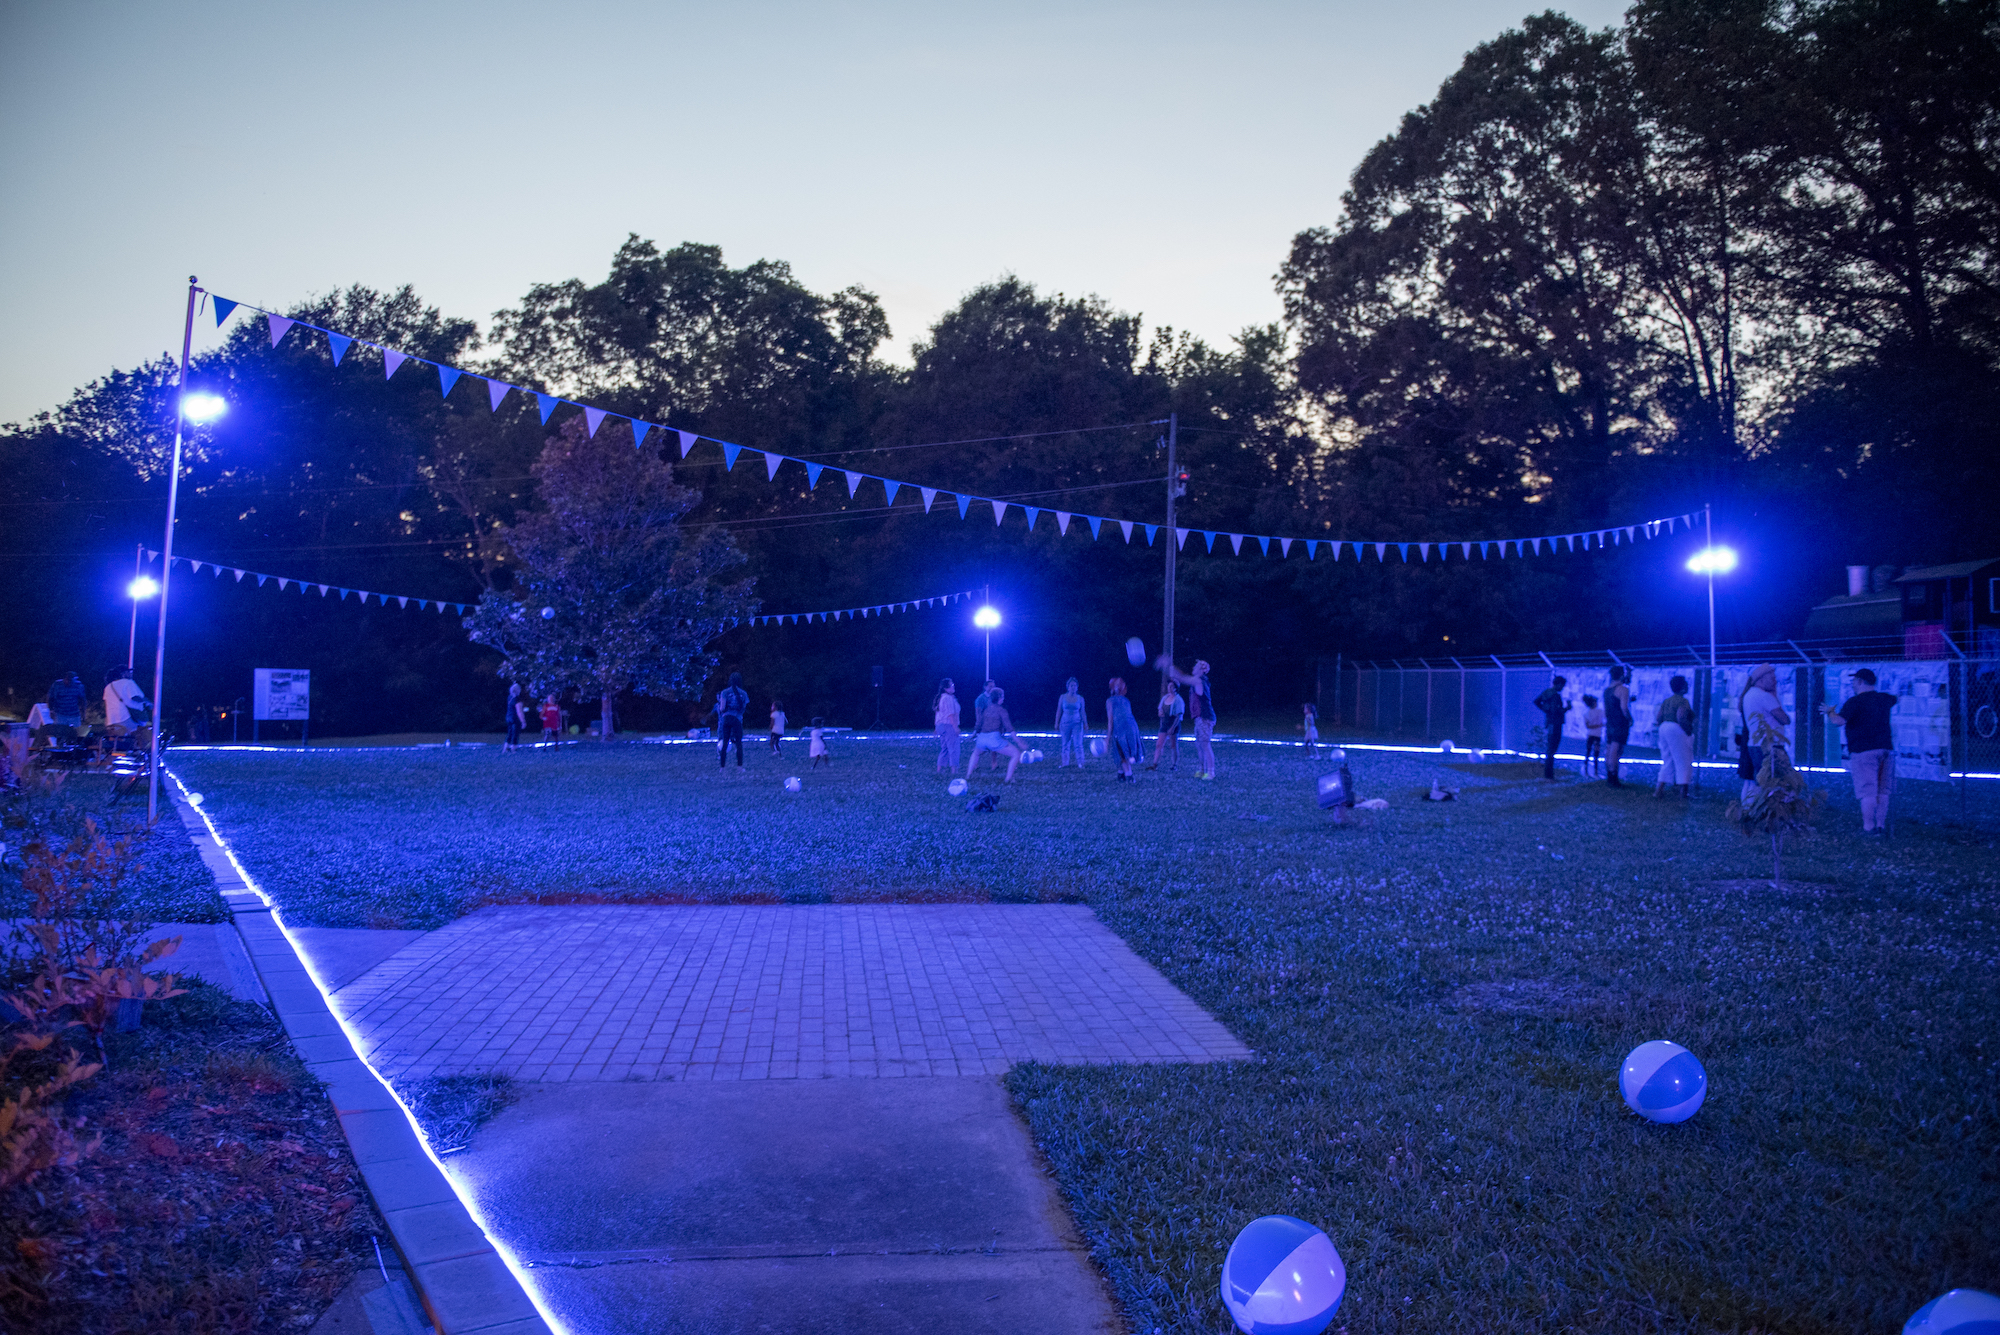 At dusk, many people are gathering in and around a perimeter of a string of blue lights that outline a field where a public pool once was.